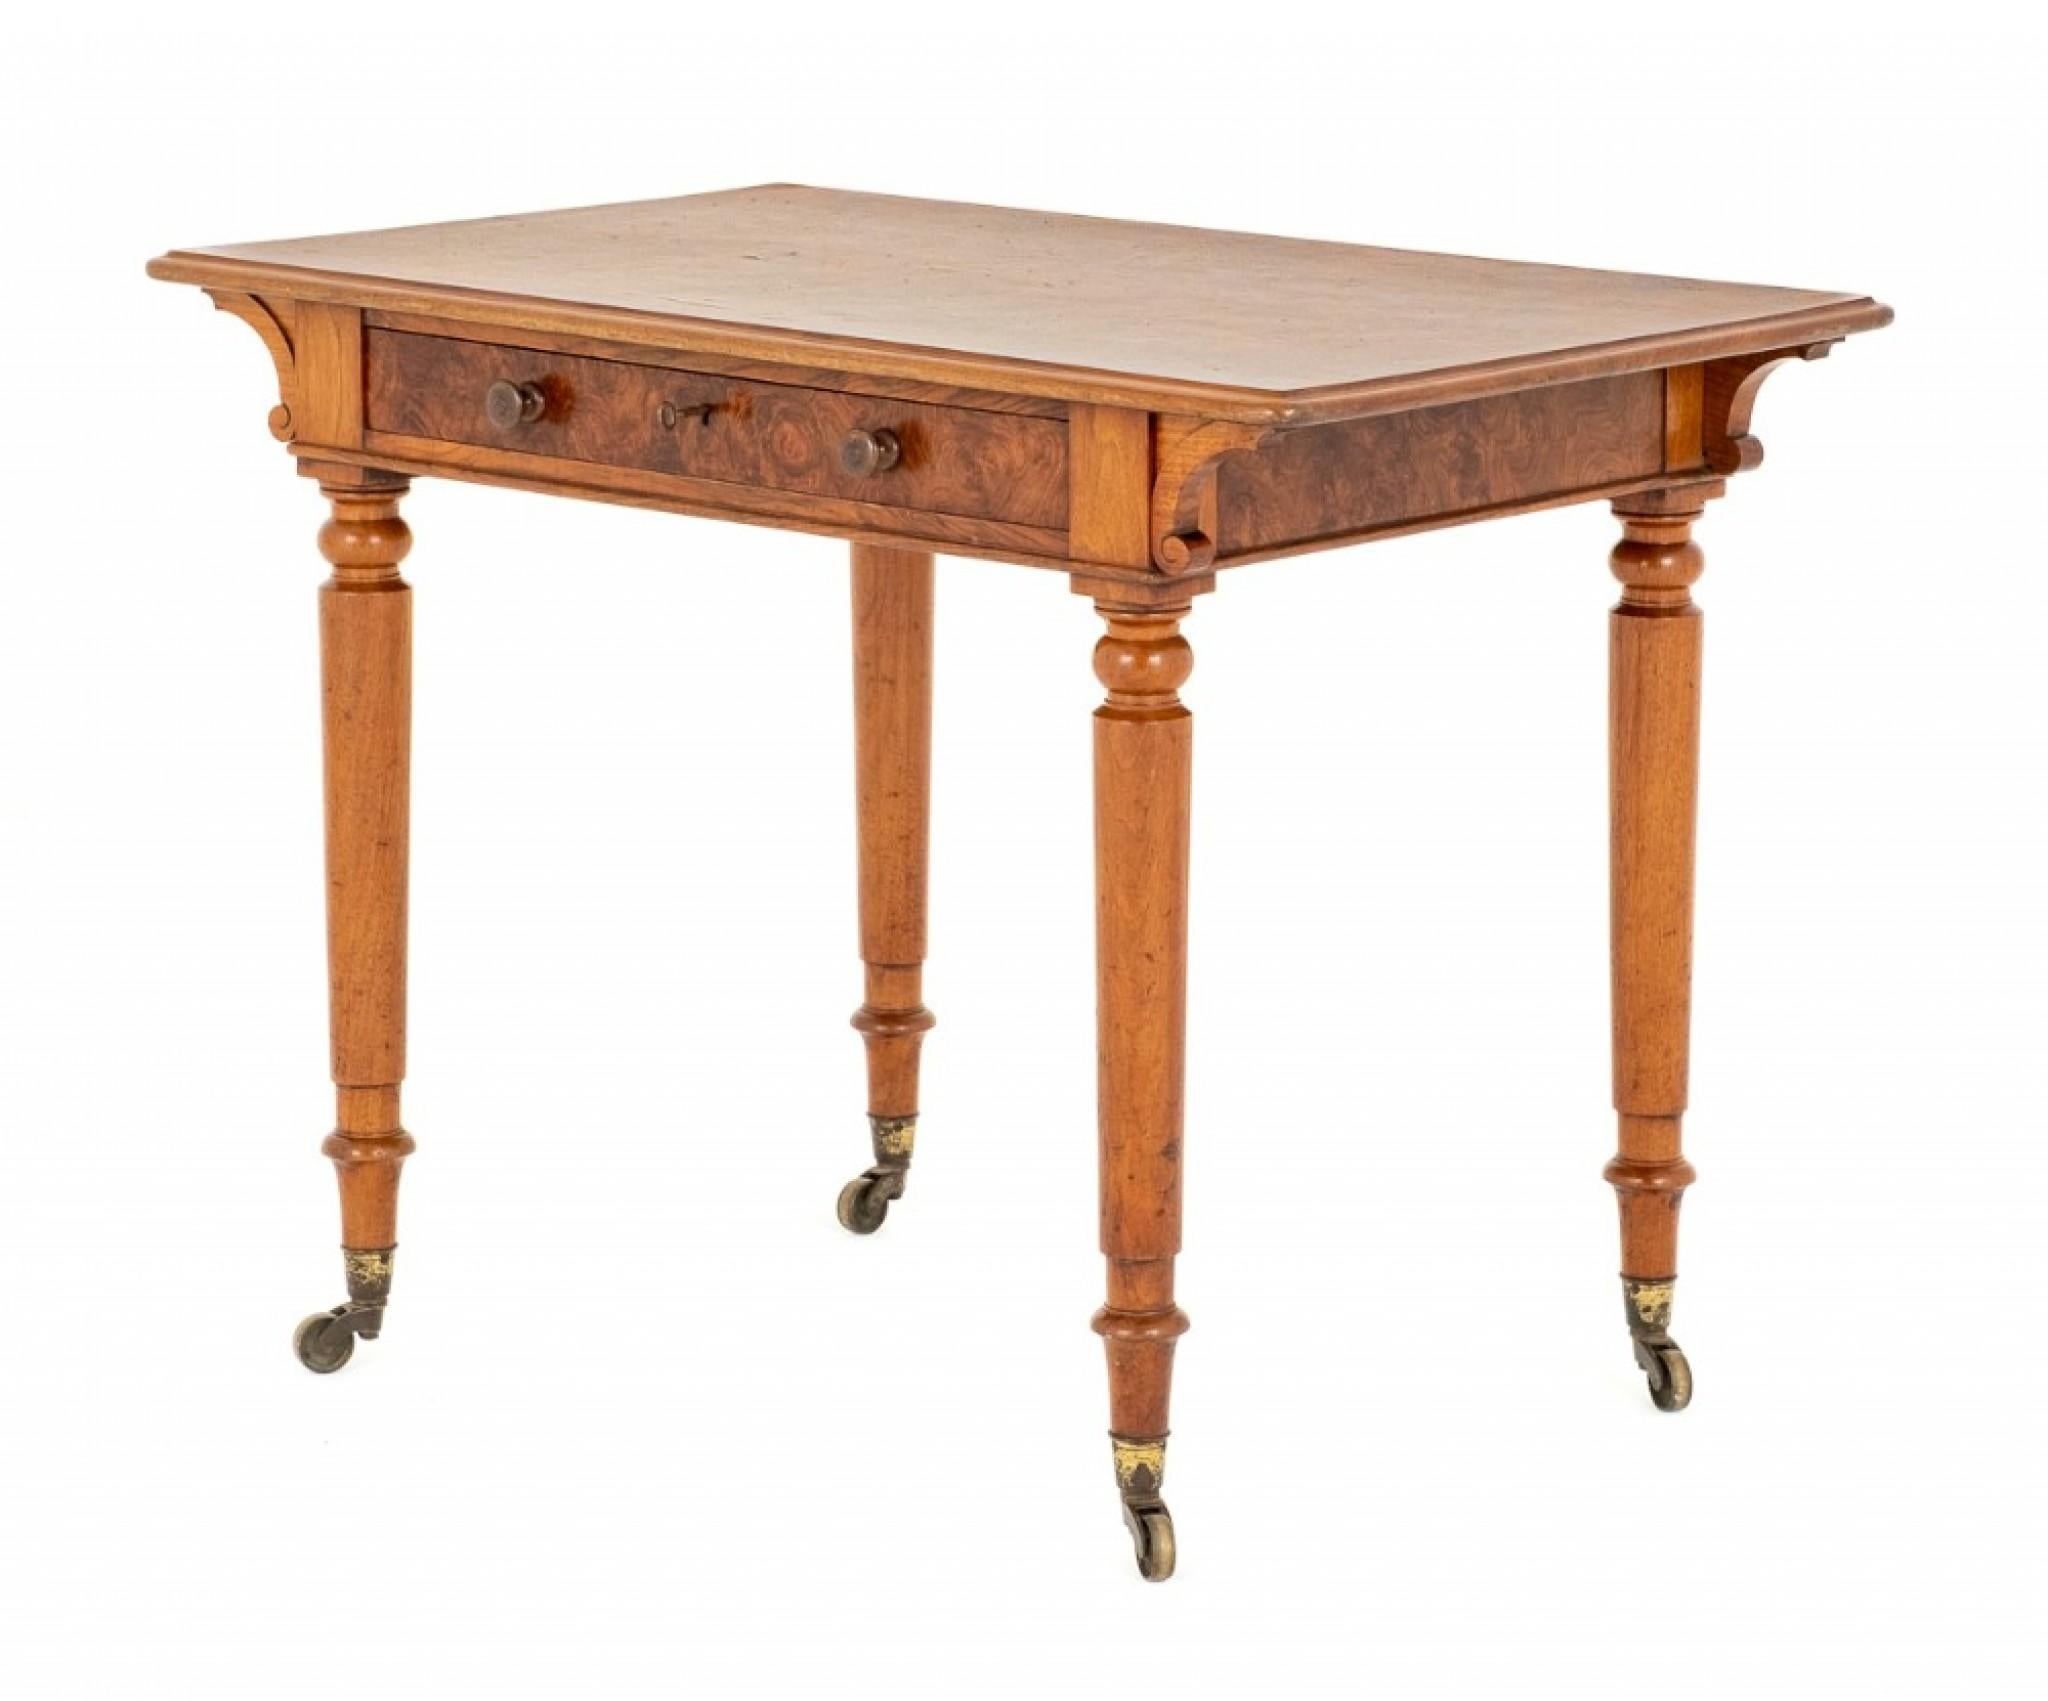 Burr Walnut Side Table (Holland and Co)
Circa 1870
This Quality Table is Raised upon Crisp Ring Turned Legs with Brass Castors.
The Table Features 1 x Mahogany Lined Drawer with the Stamp of Holland and Co.
The Top of the Table Having Wonderful Burr